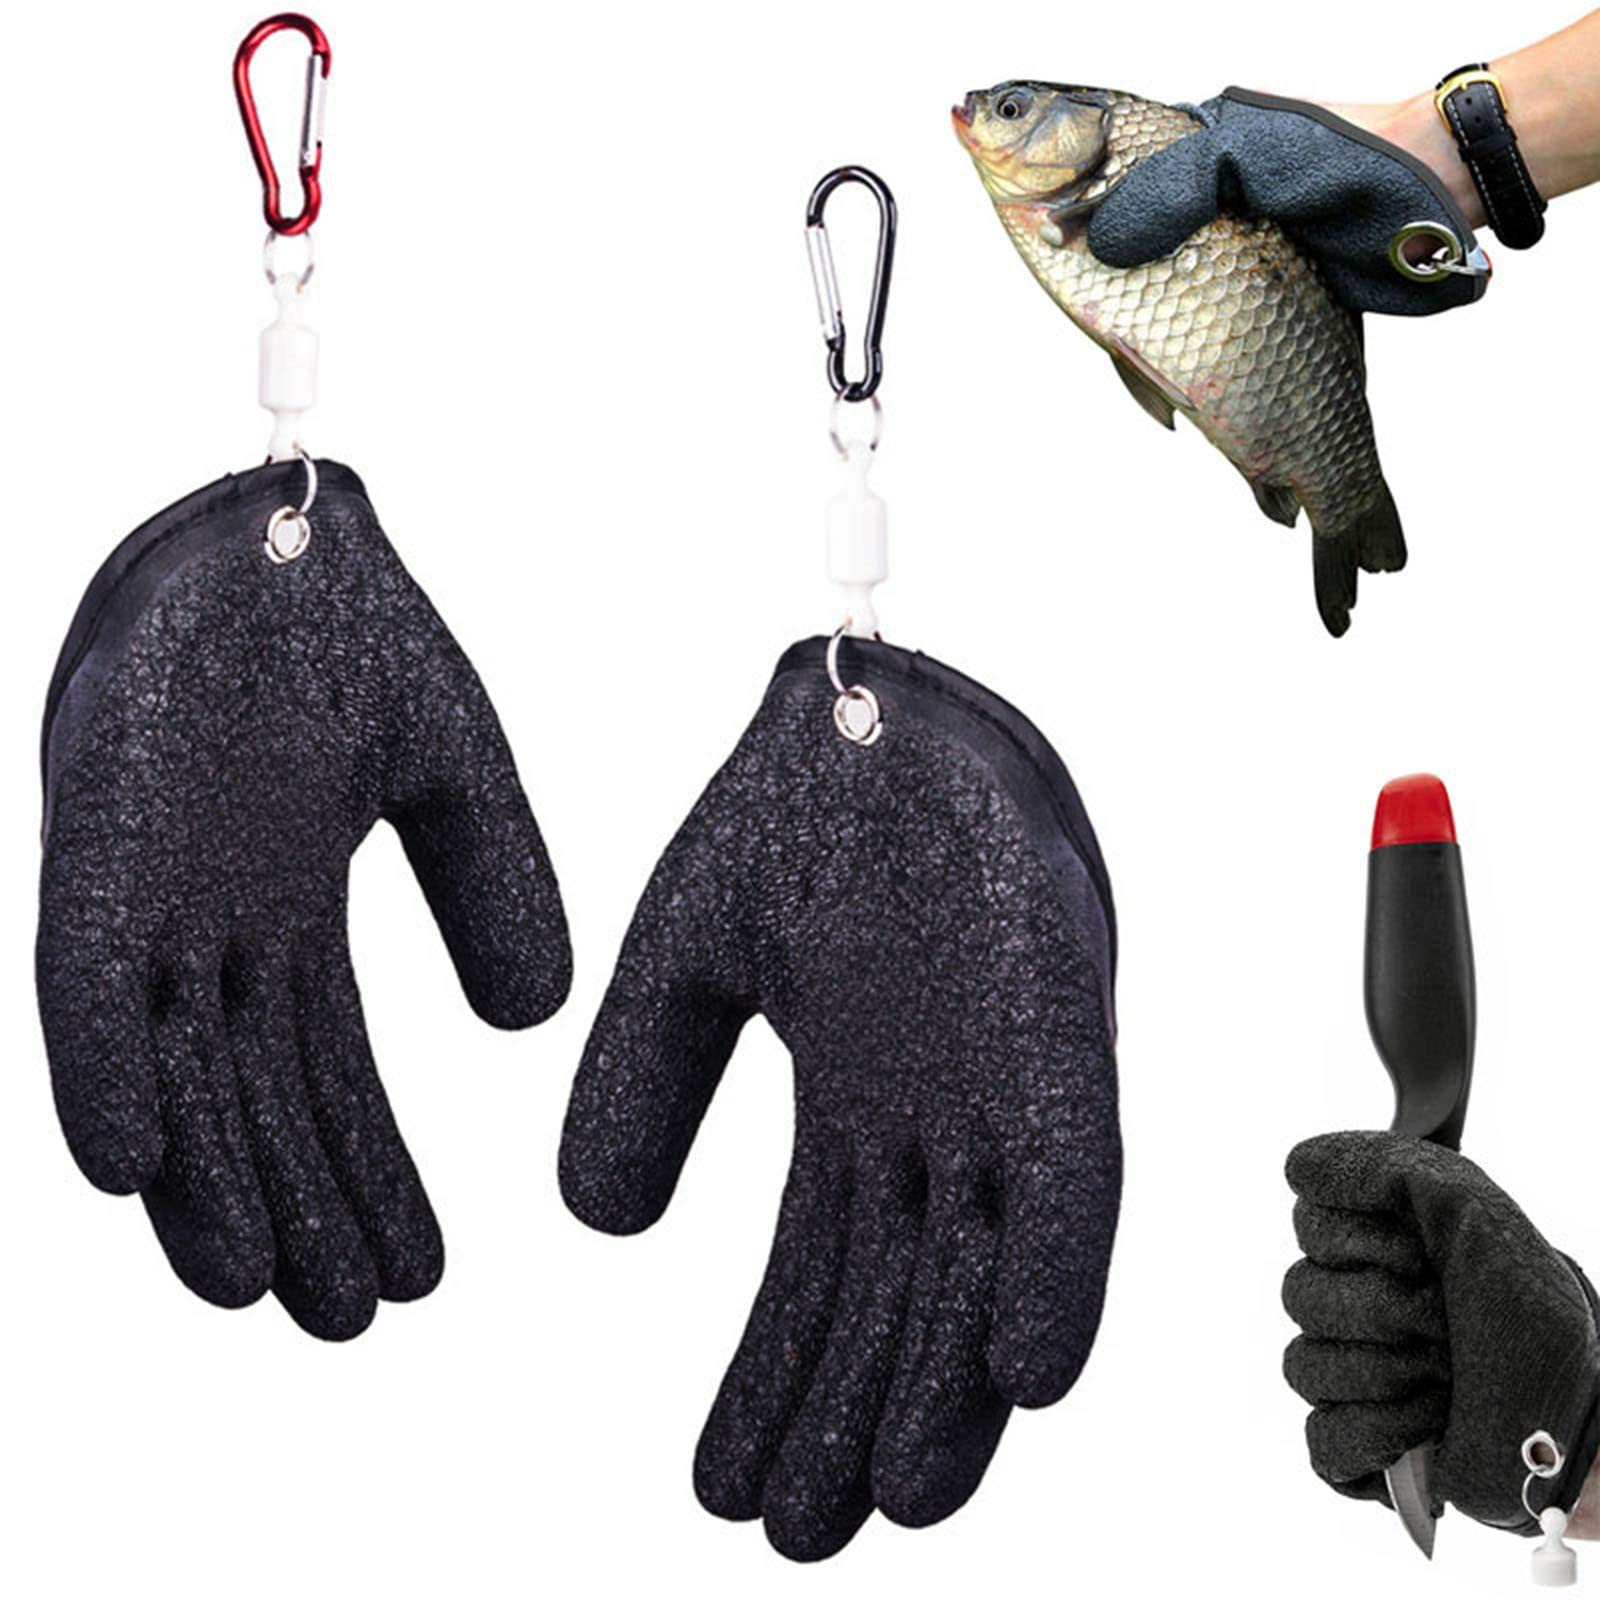 Professional slip Fishing ing Hunting Gloves Puncture Cut